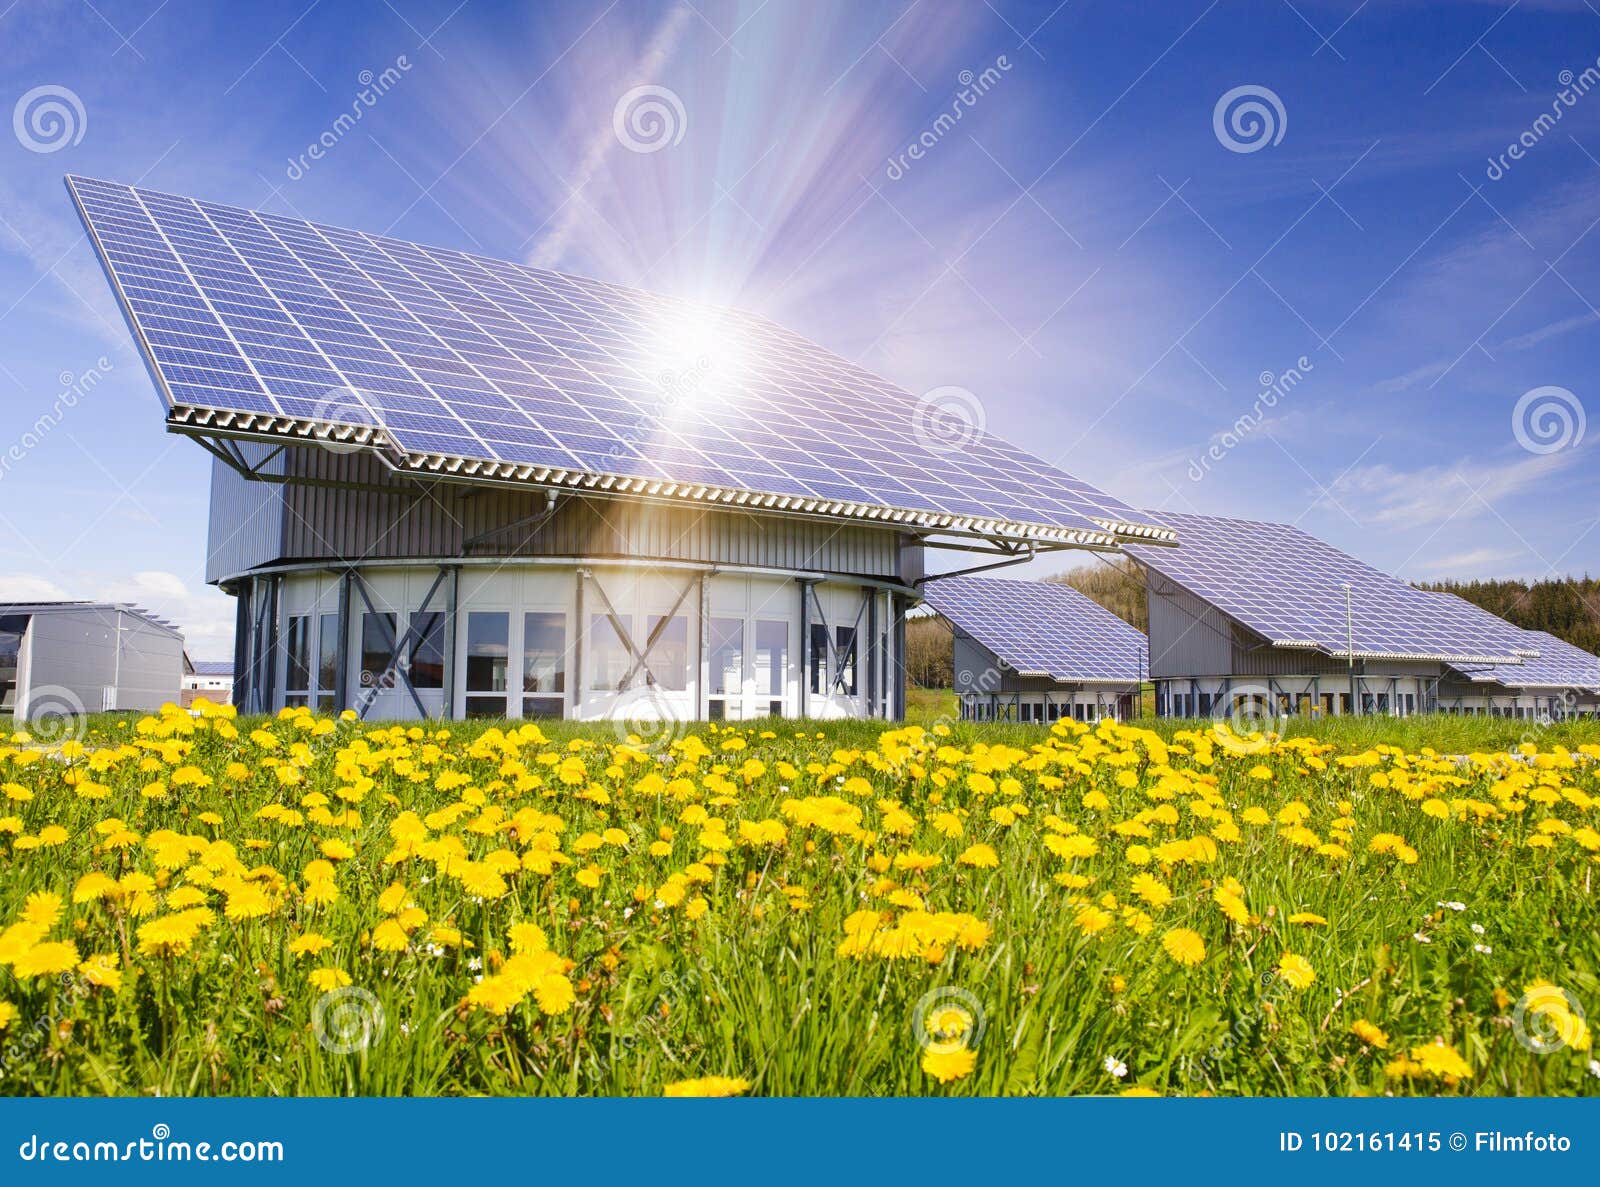 Solar Power Panel On Roof In Germany Stock Image Image of photovoltaic, resources 102161415